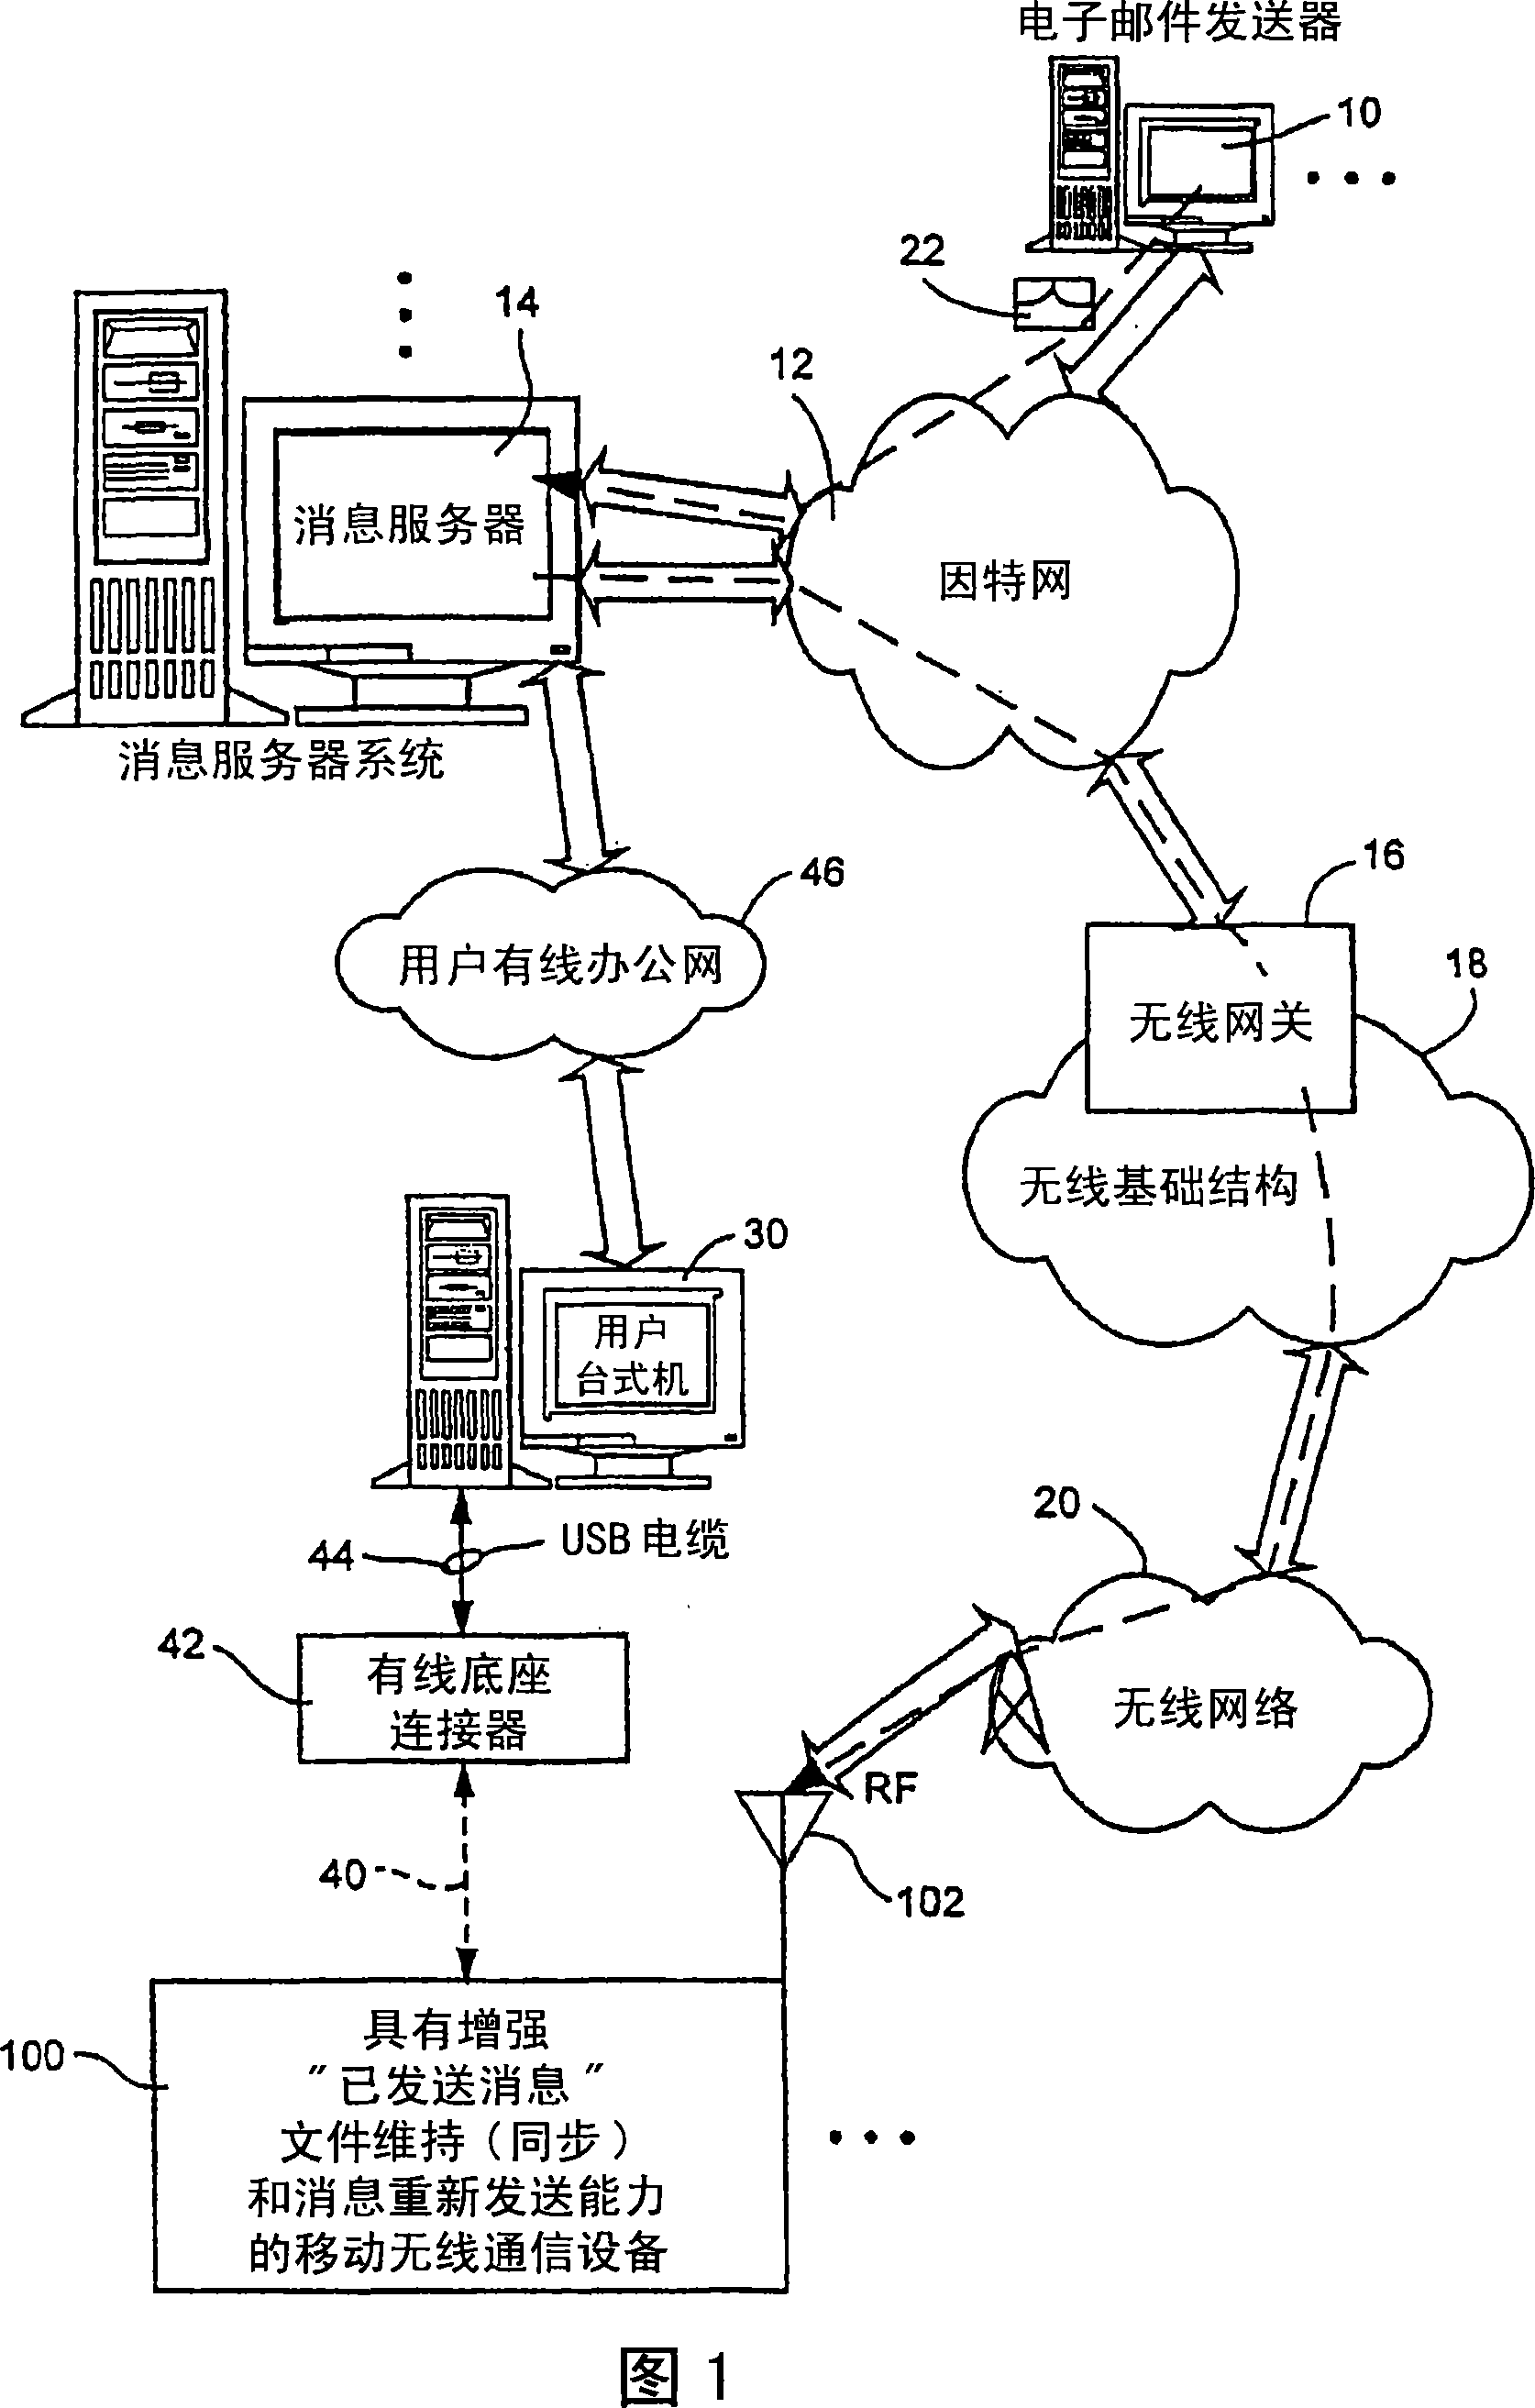 Method and apparatus for efficiently managing 'messages sent' file and resending of messages from mobile wireless communication device